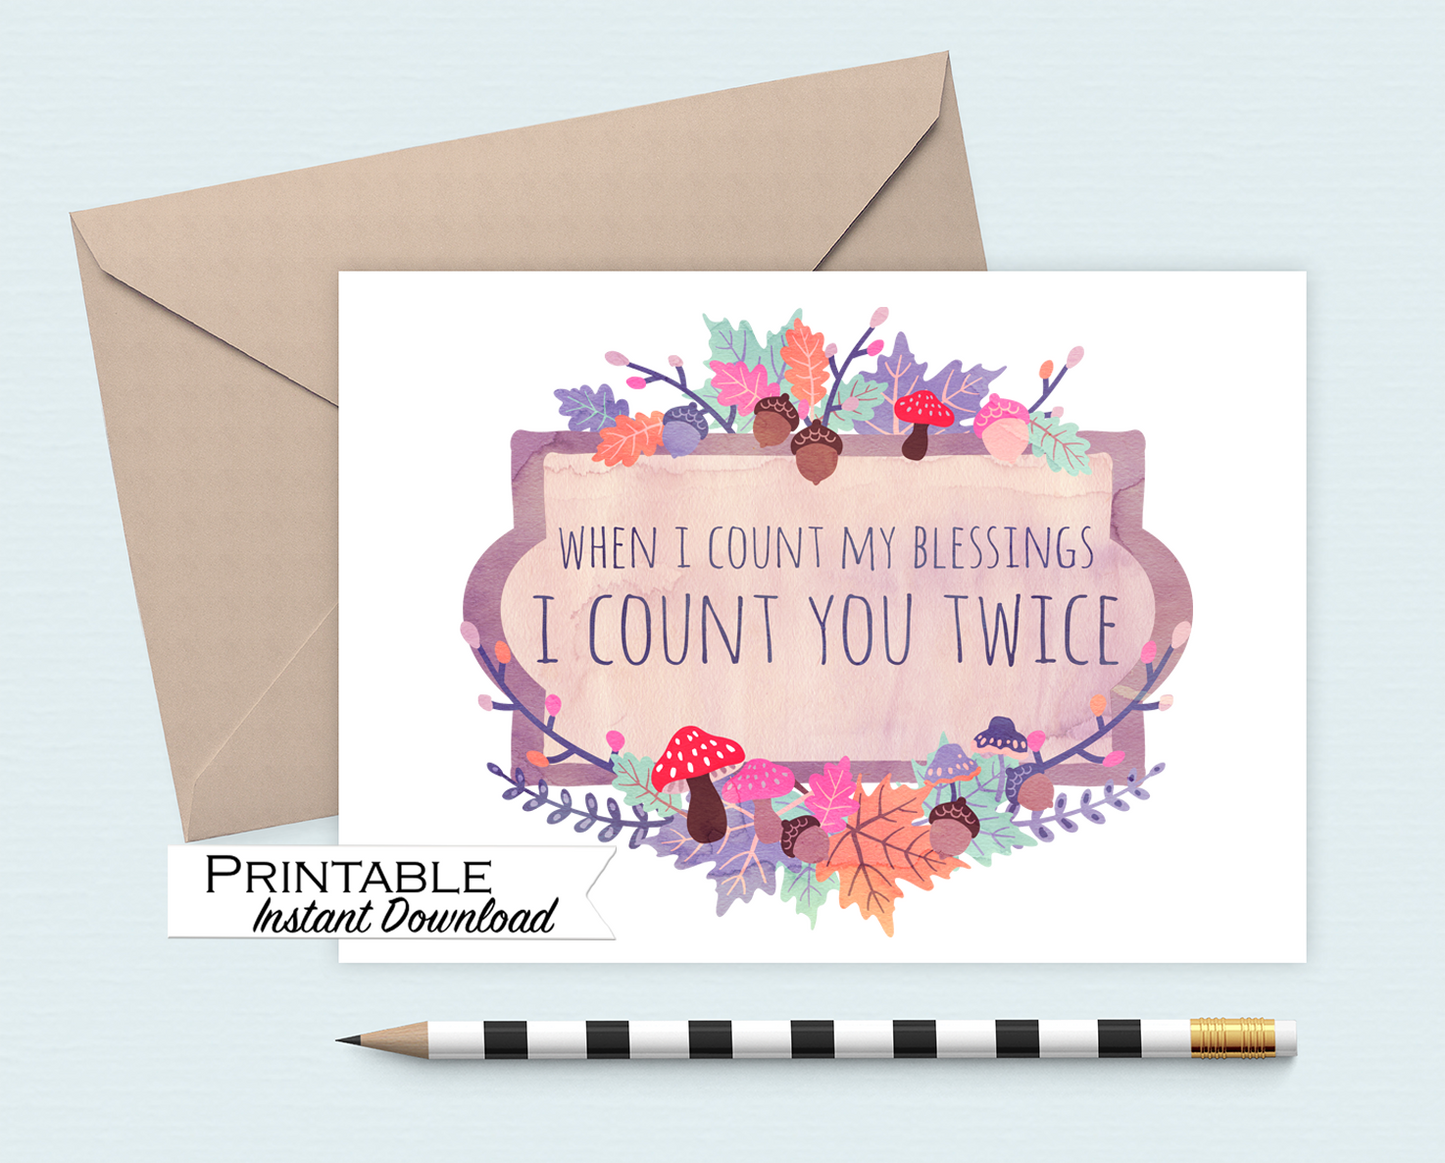 Thanksgiving Card, When I Count my Blessings I Count you Twice, Printable Card